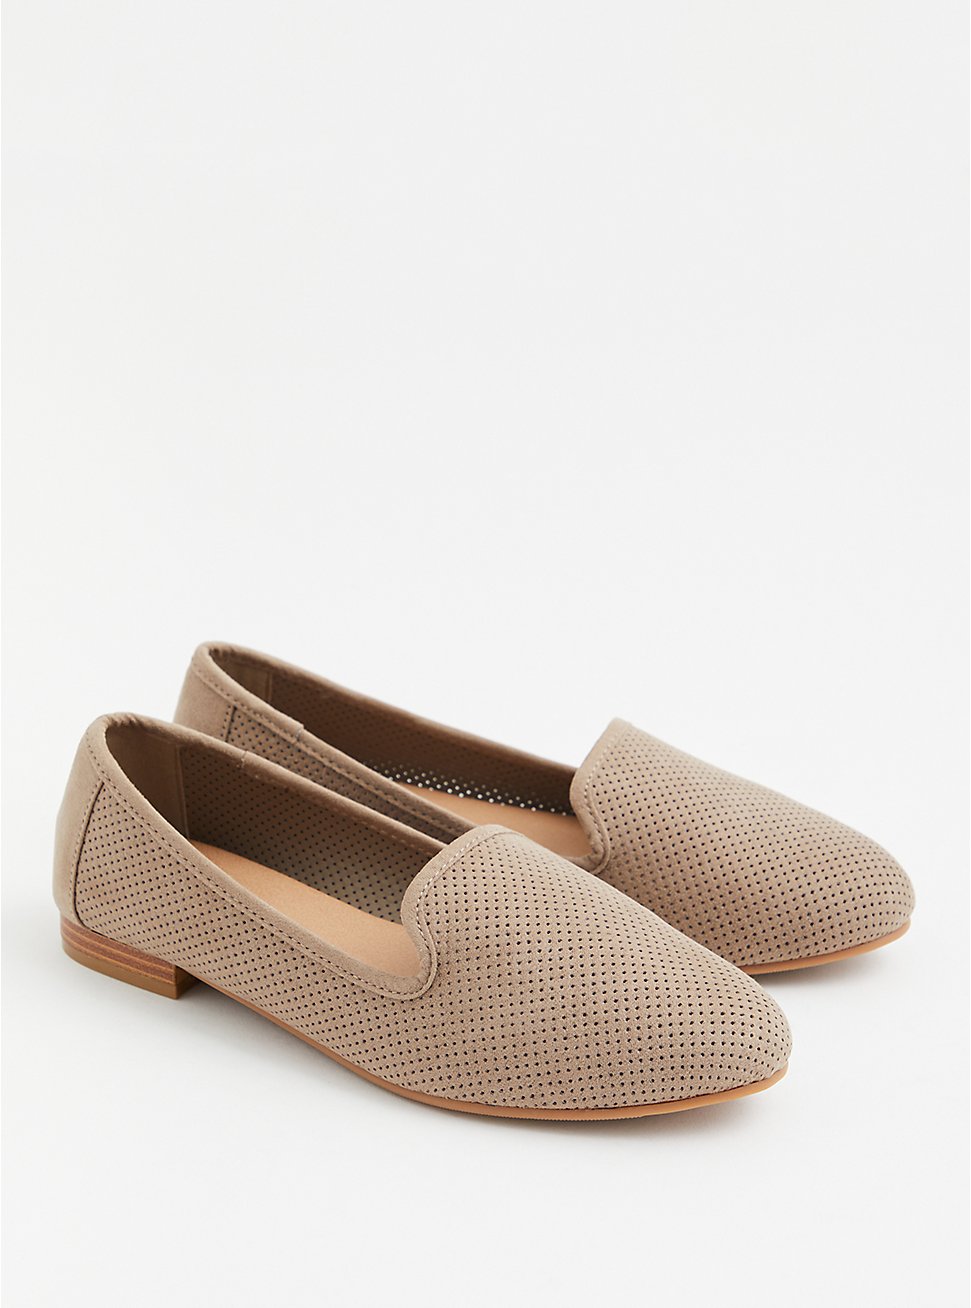 Taupe Nubuck Perforated Loafer (WW), TAN/BEIGE, hi-res